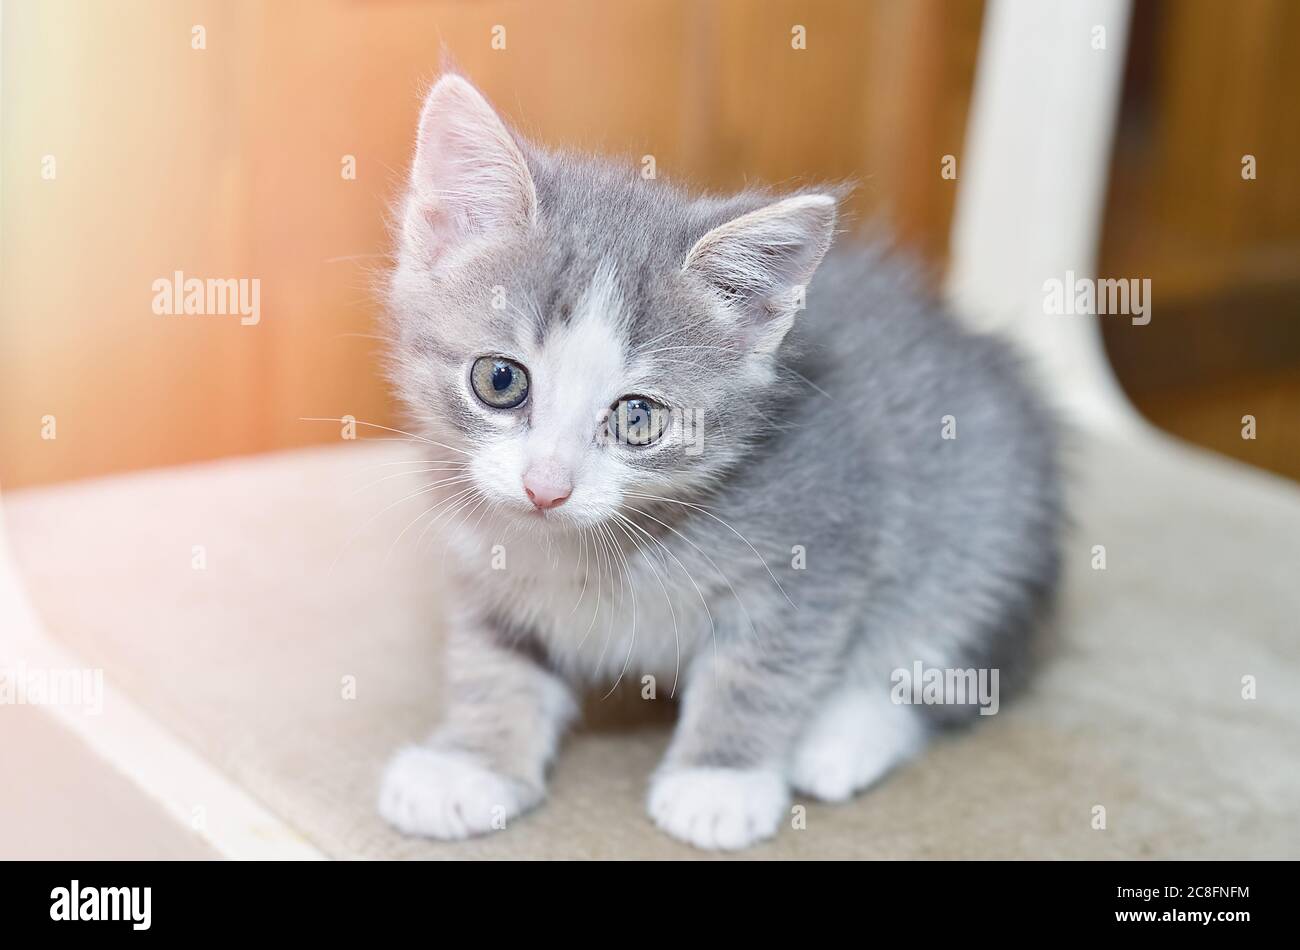 A small smoky kitten sits on a chair and looks sad Stock Photo